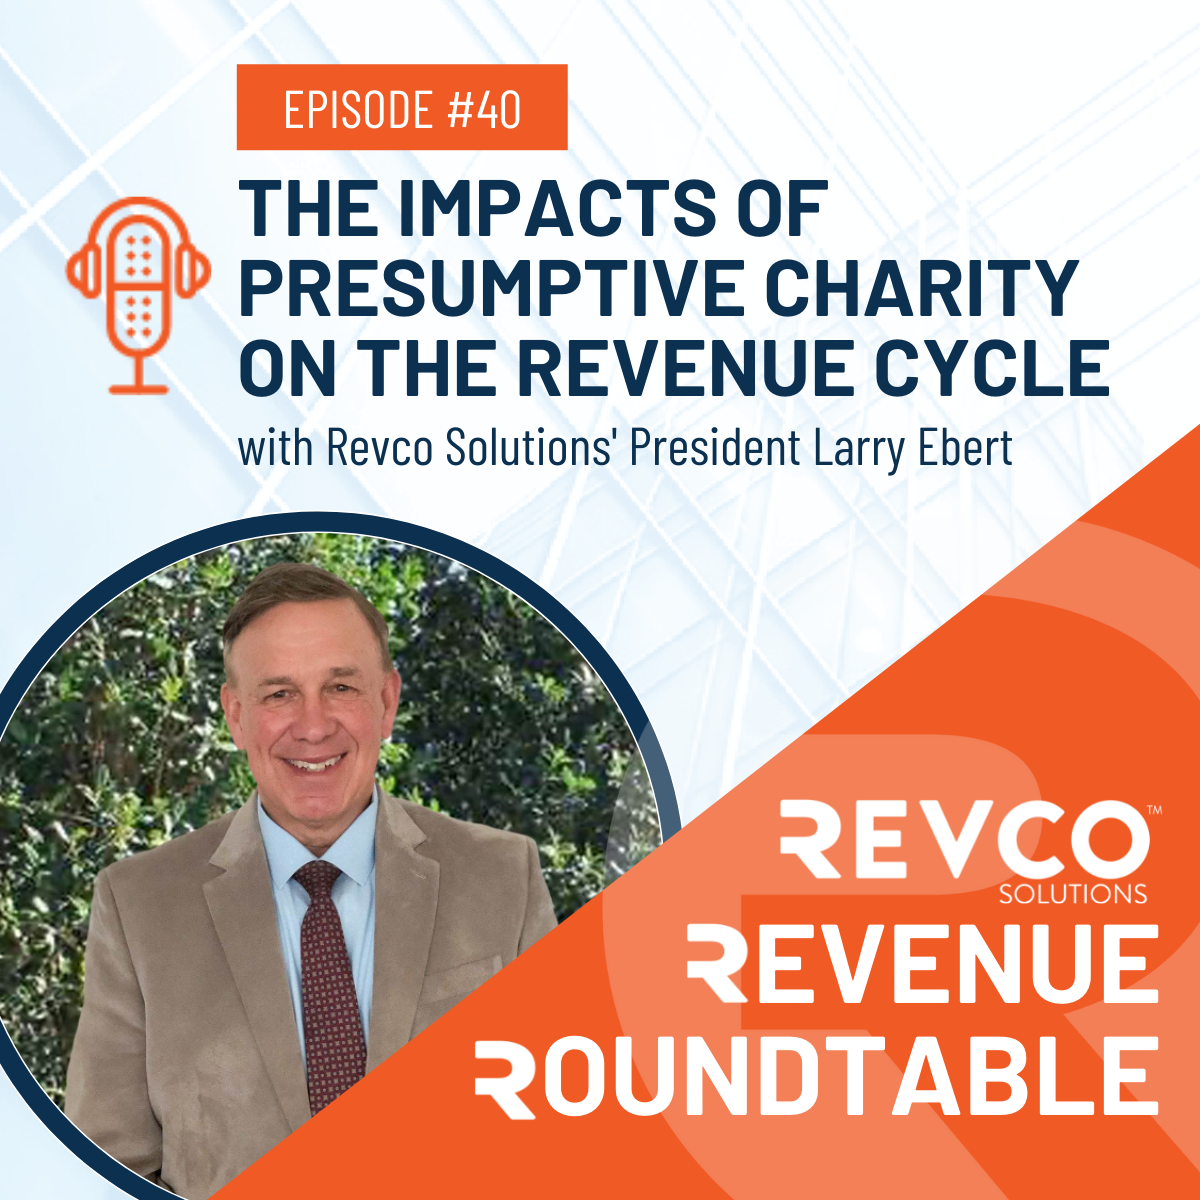 Revenue Roundtable Podcast Ep. 40: The Impacts of Presumptive Charity Care on the Revenue Cycle